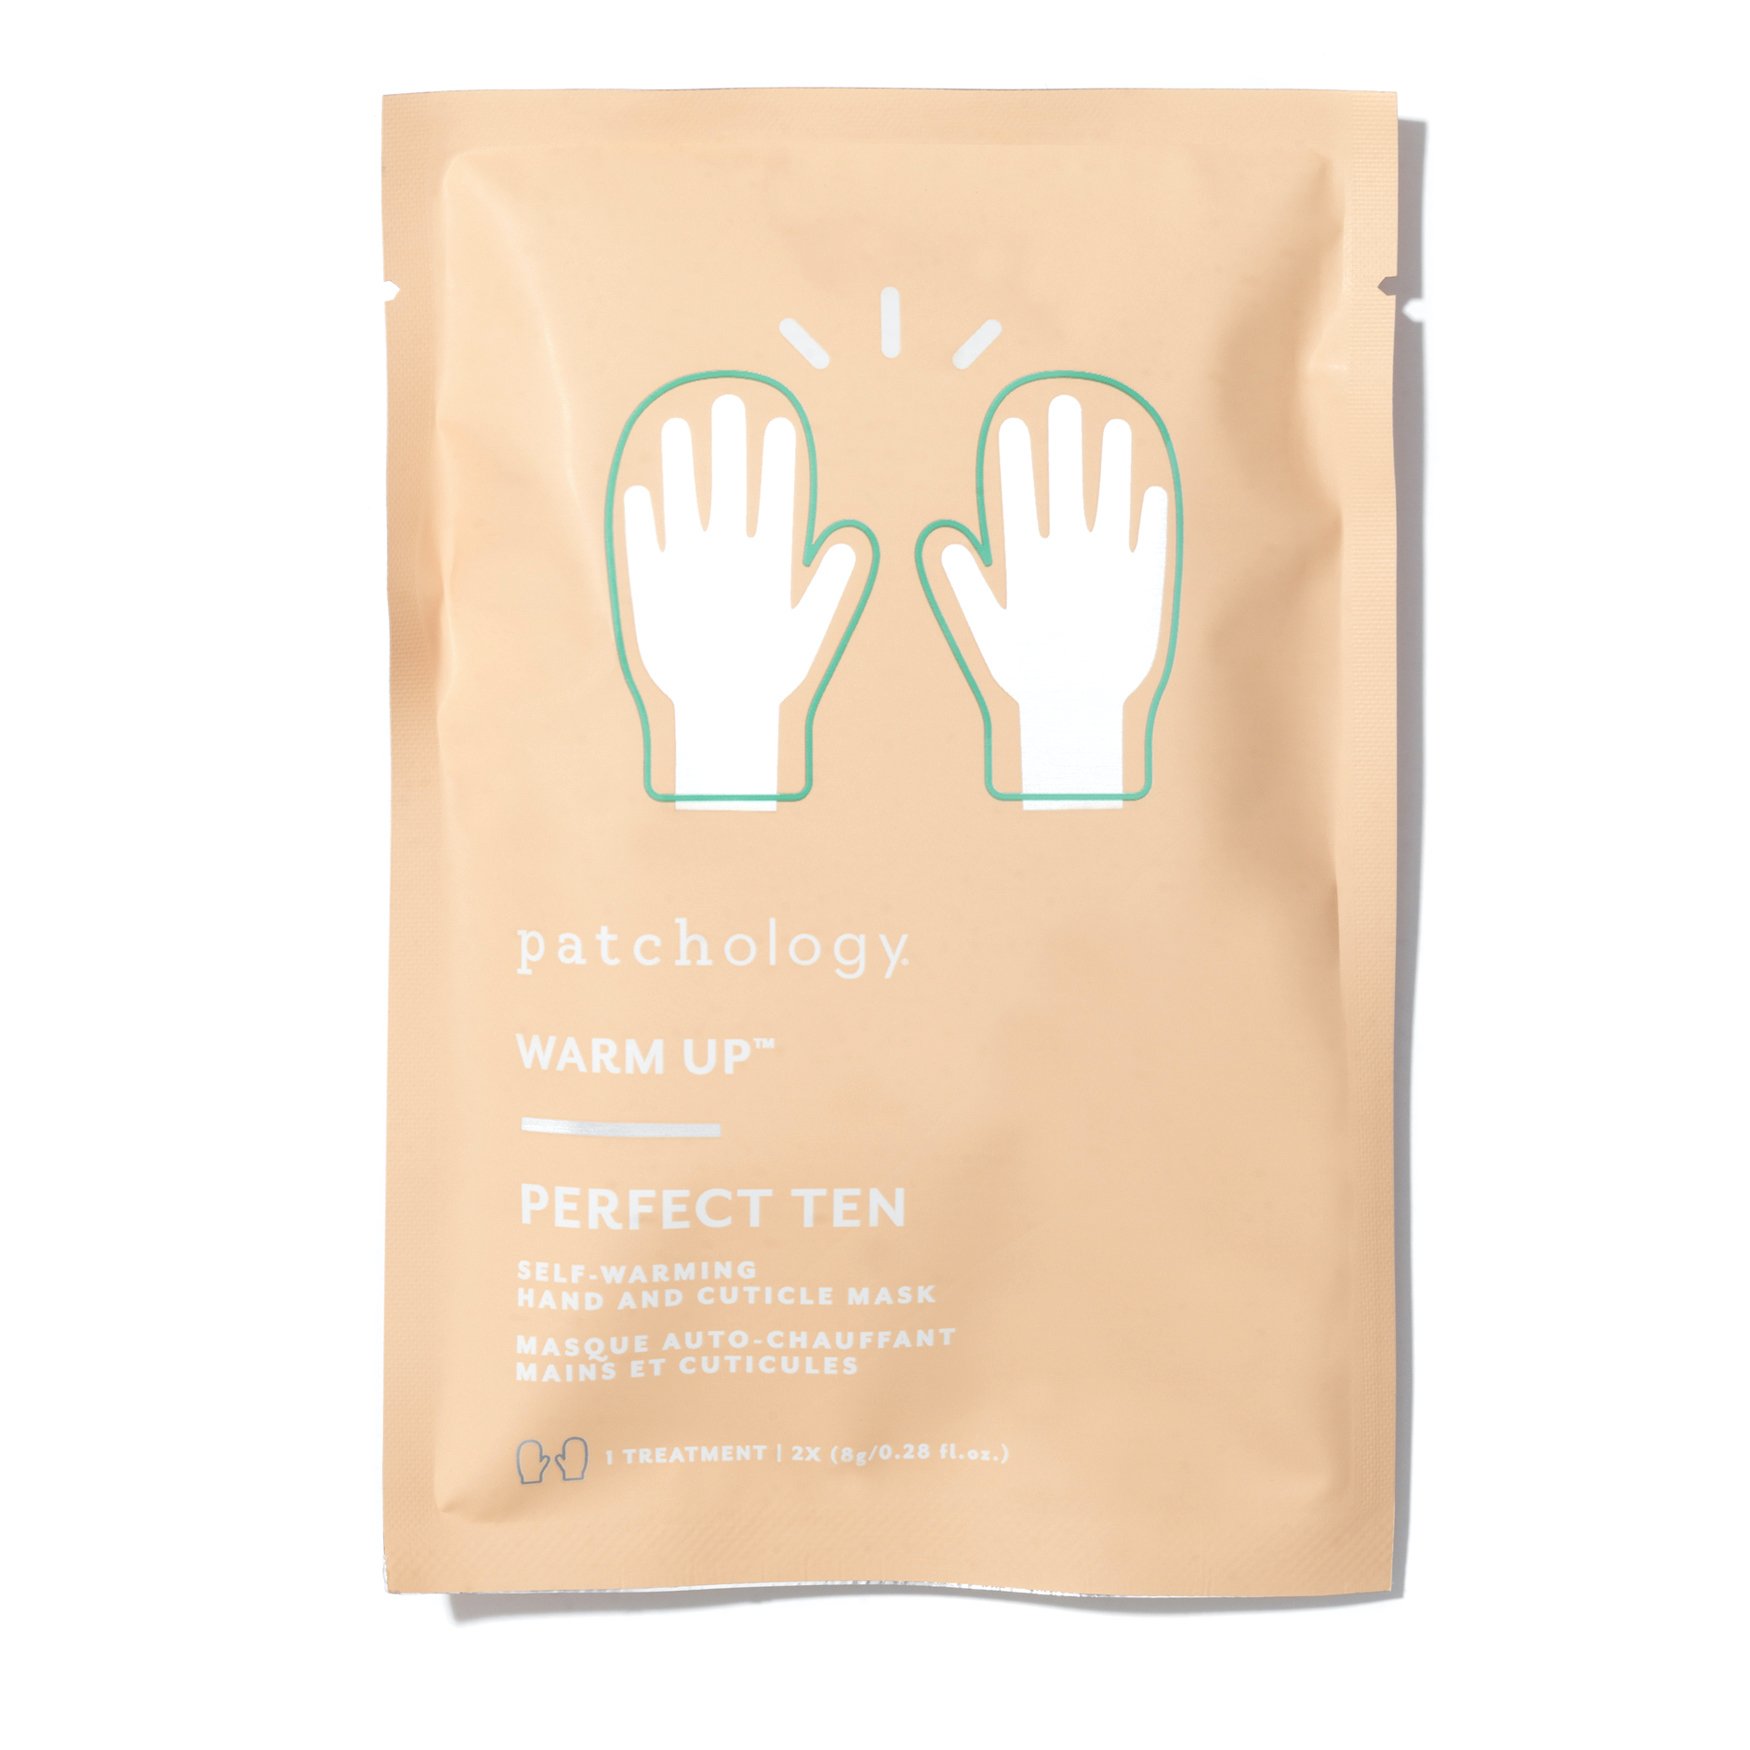 1. Patchology Perfect Ten Self-Warming Hand And Cuticle Mask €8,